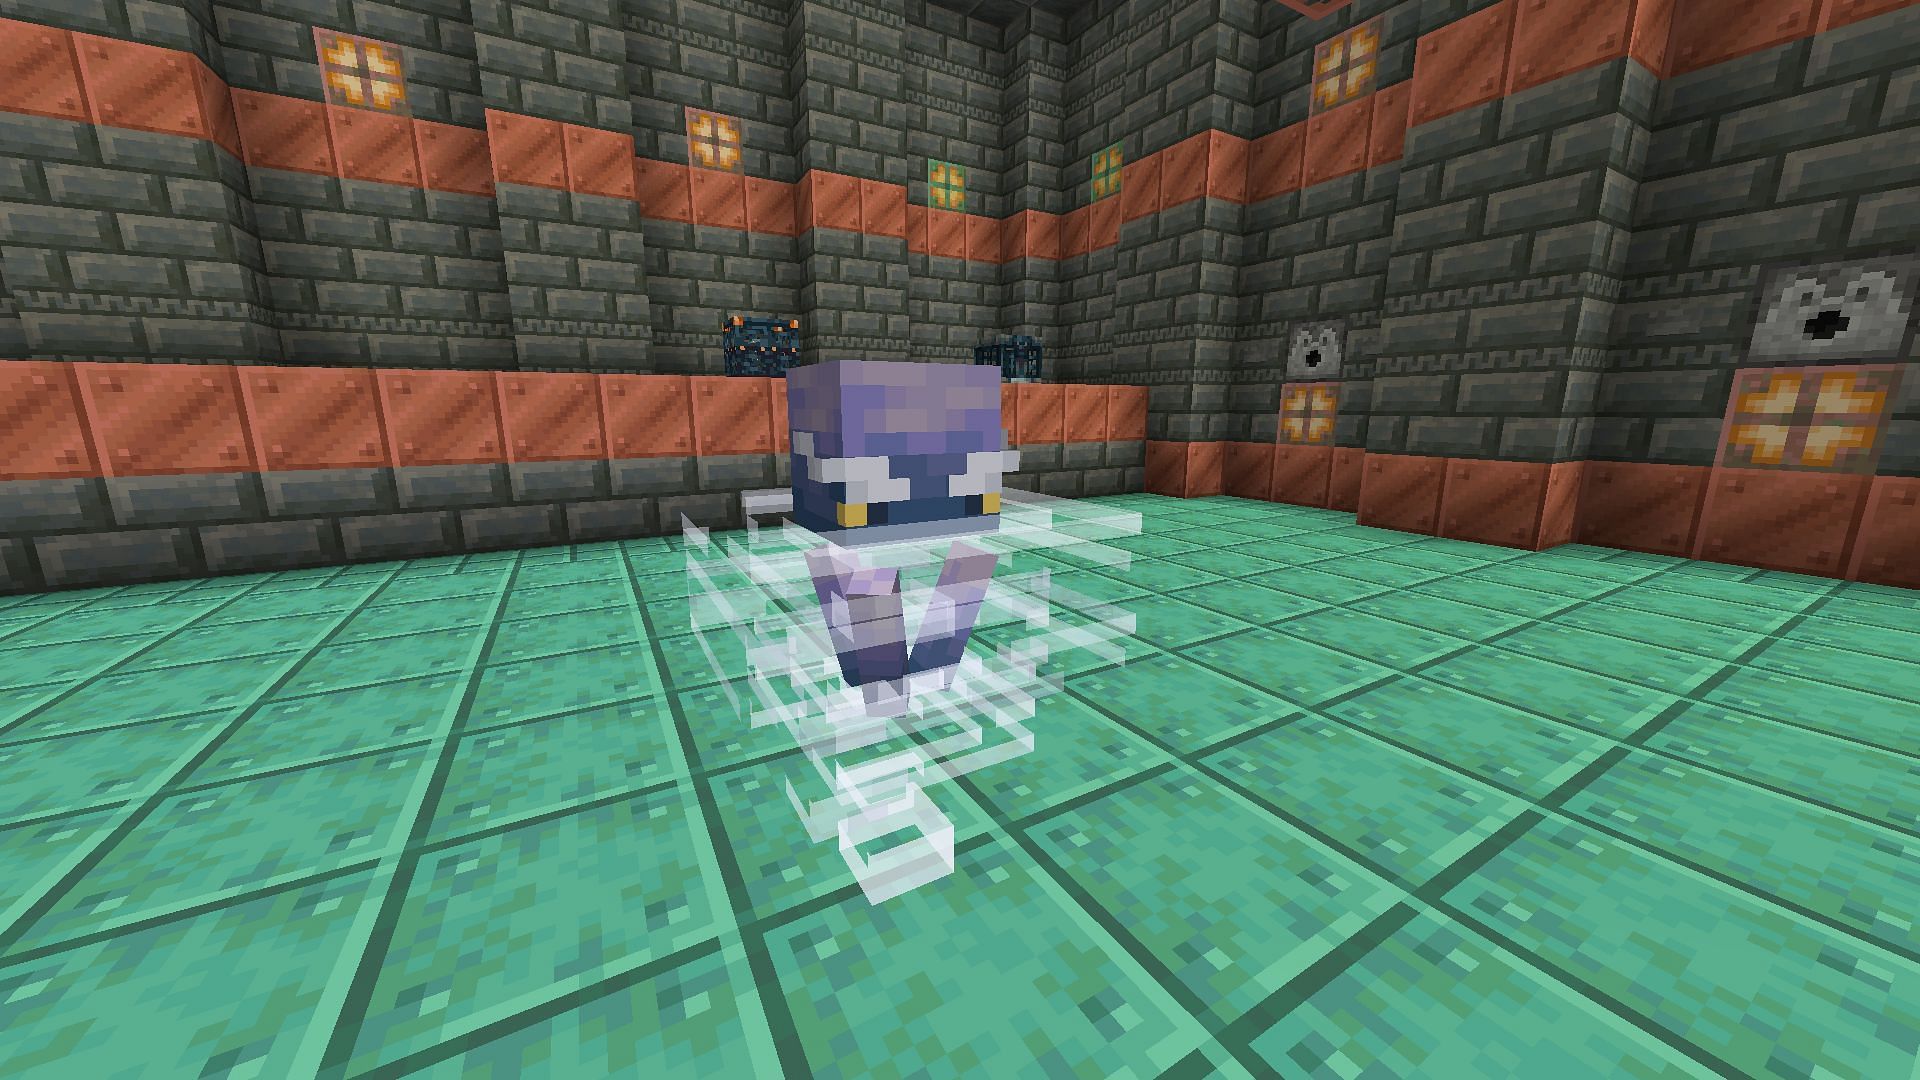 You must first find a trial chamber and fight some breeze mobs spawning in it (Image via Mojang Studios)